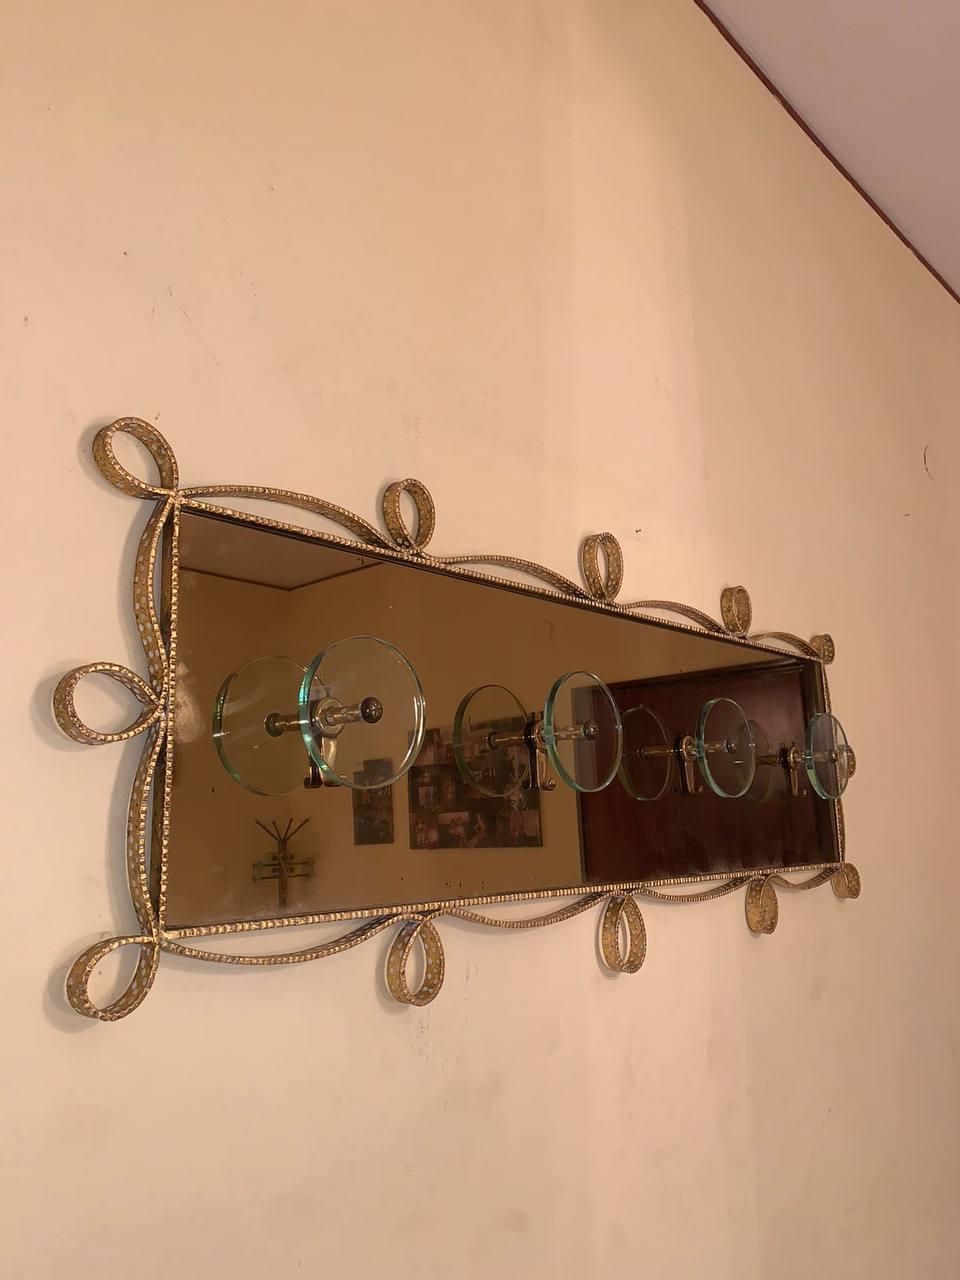 Elegant and fine handcrafted brass coat stand, gold-colored mirrored glass, made by Pierluigi Colli, 1950s. Including rectangular glass on top. Presence of two round patinas on the glass, caused by 'wear and tear of time.. Upper glass support